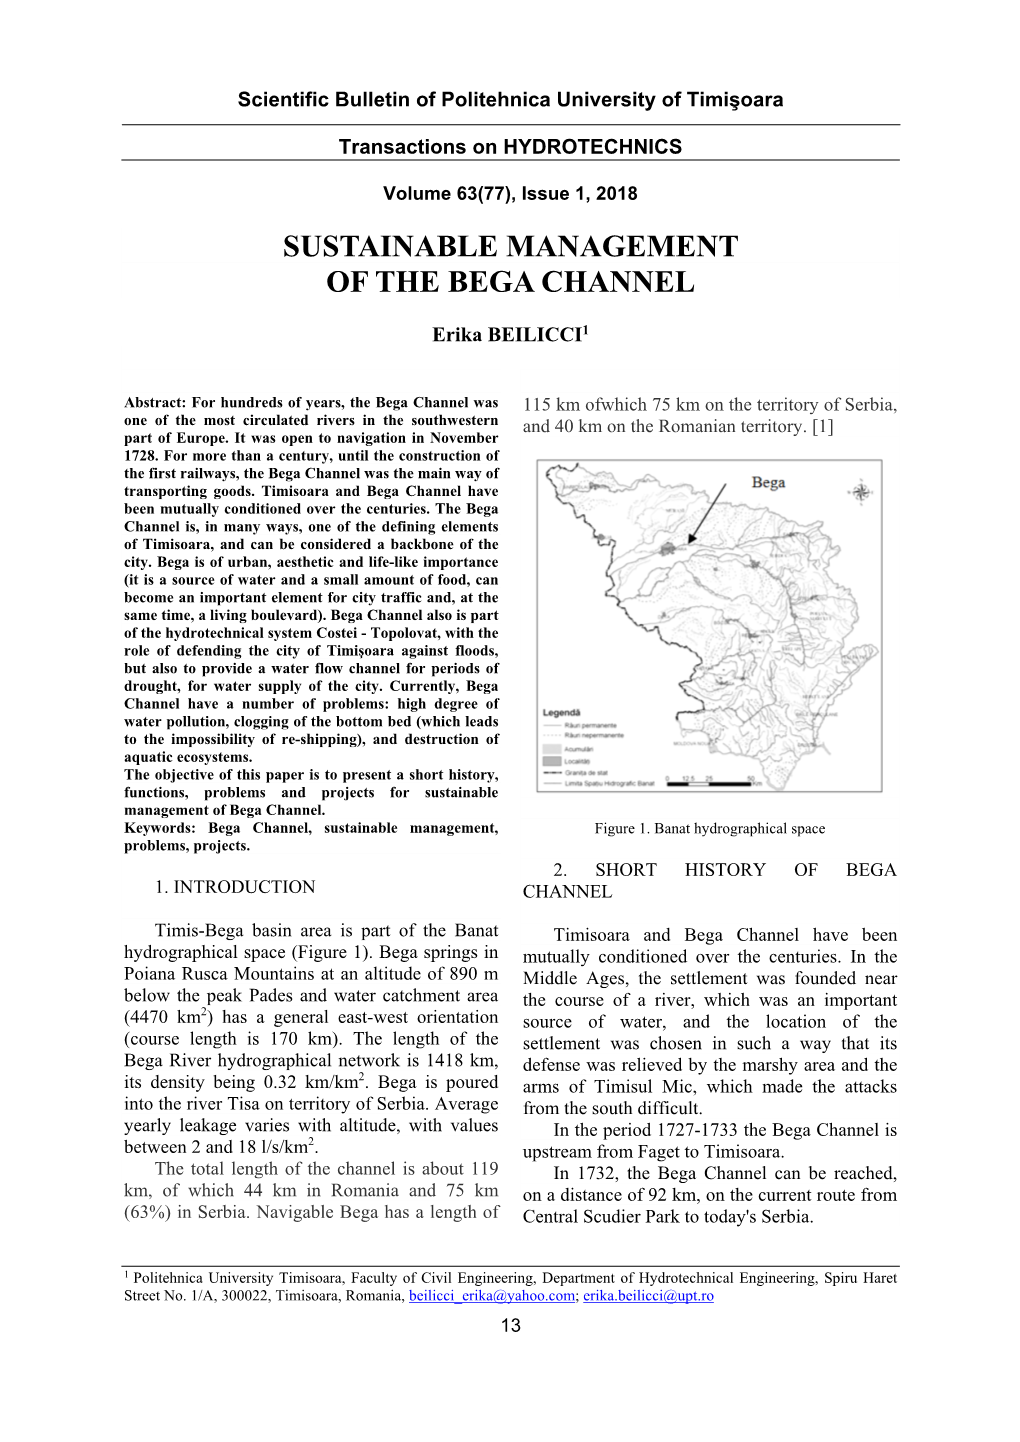 Sustainable Management of the Bega Channel